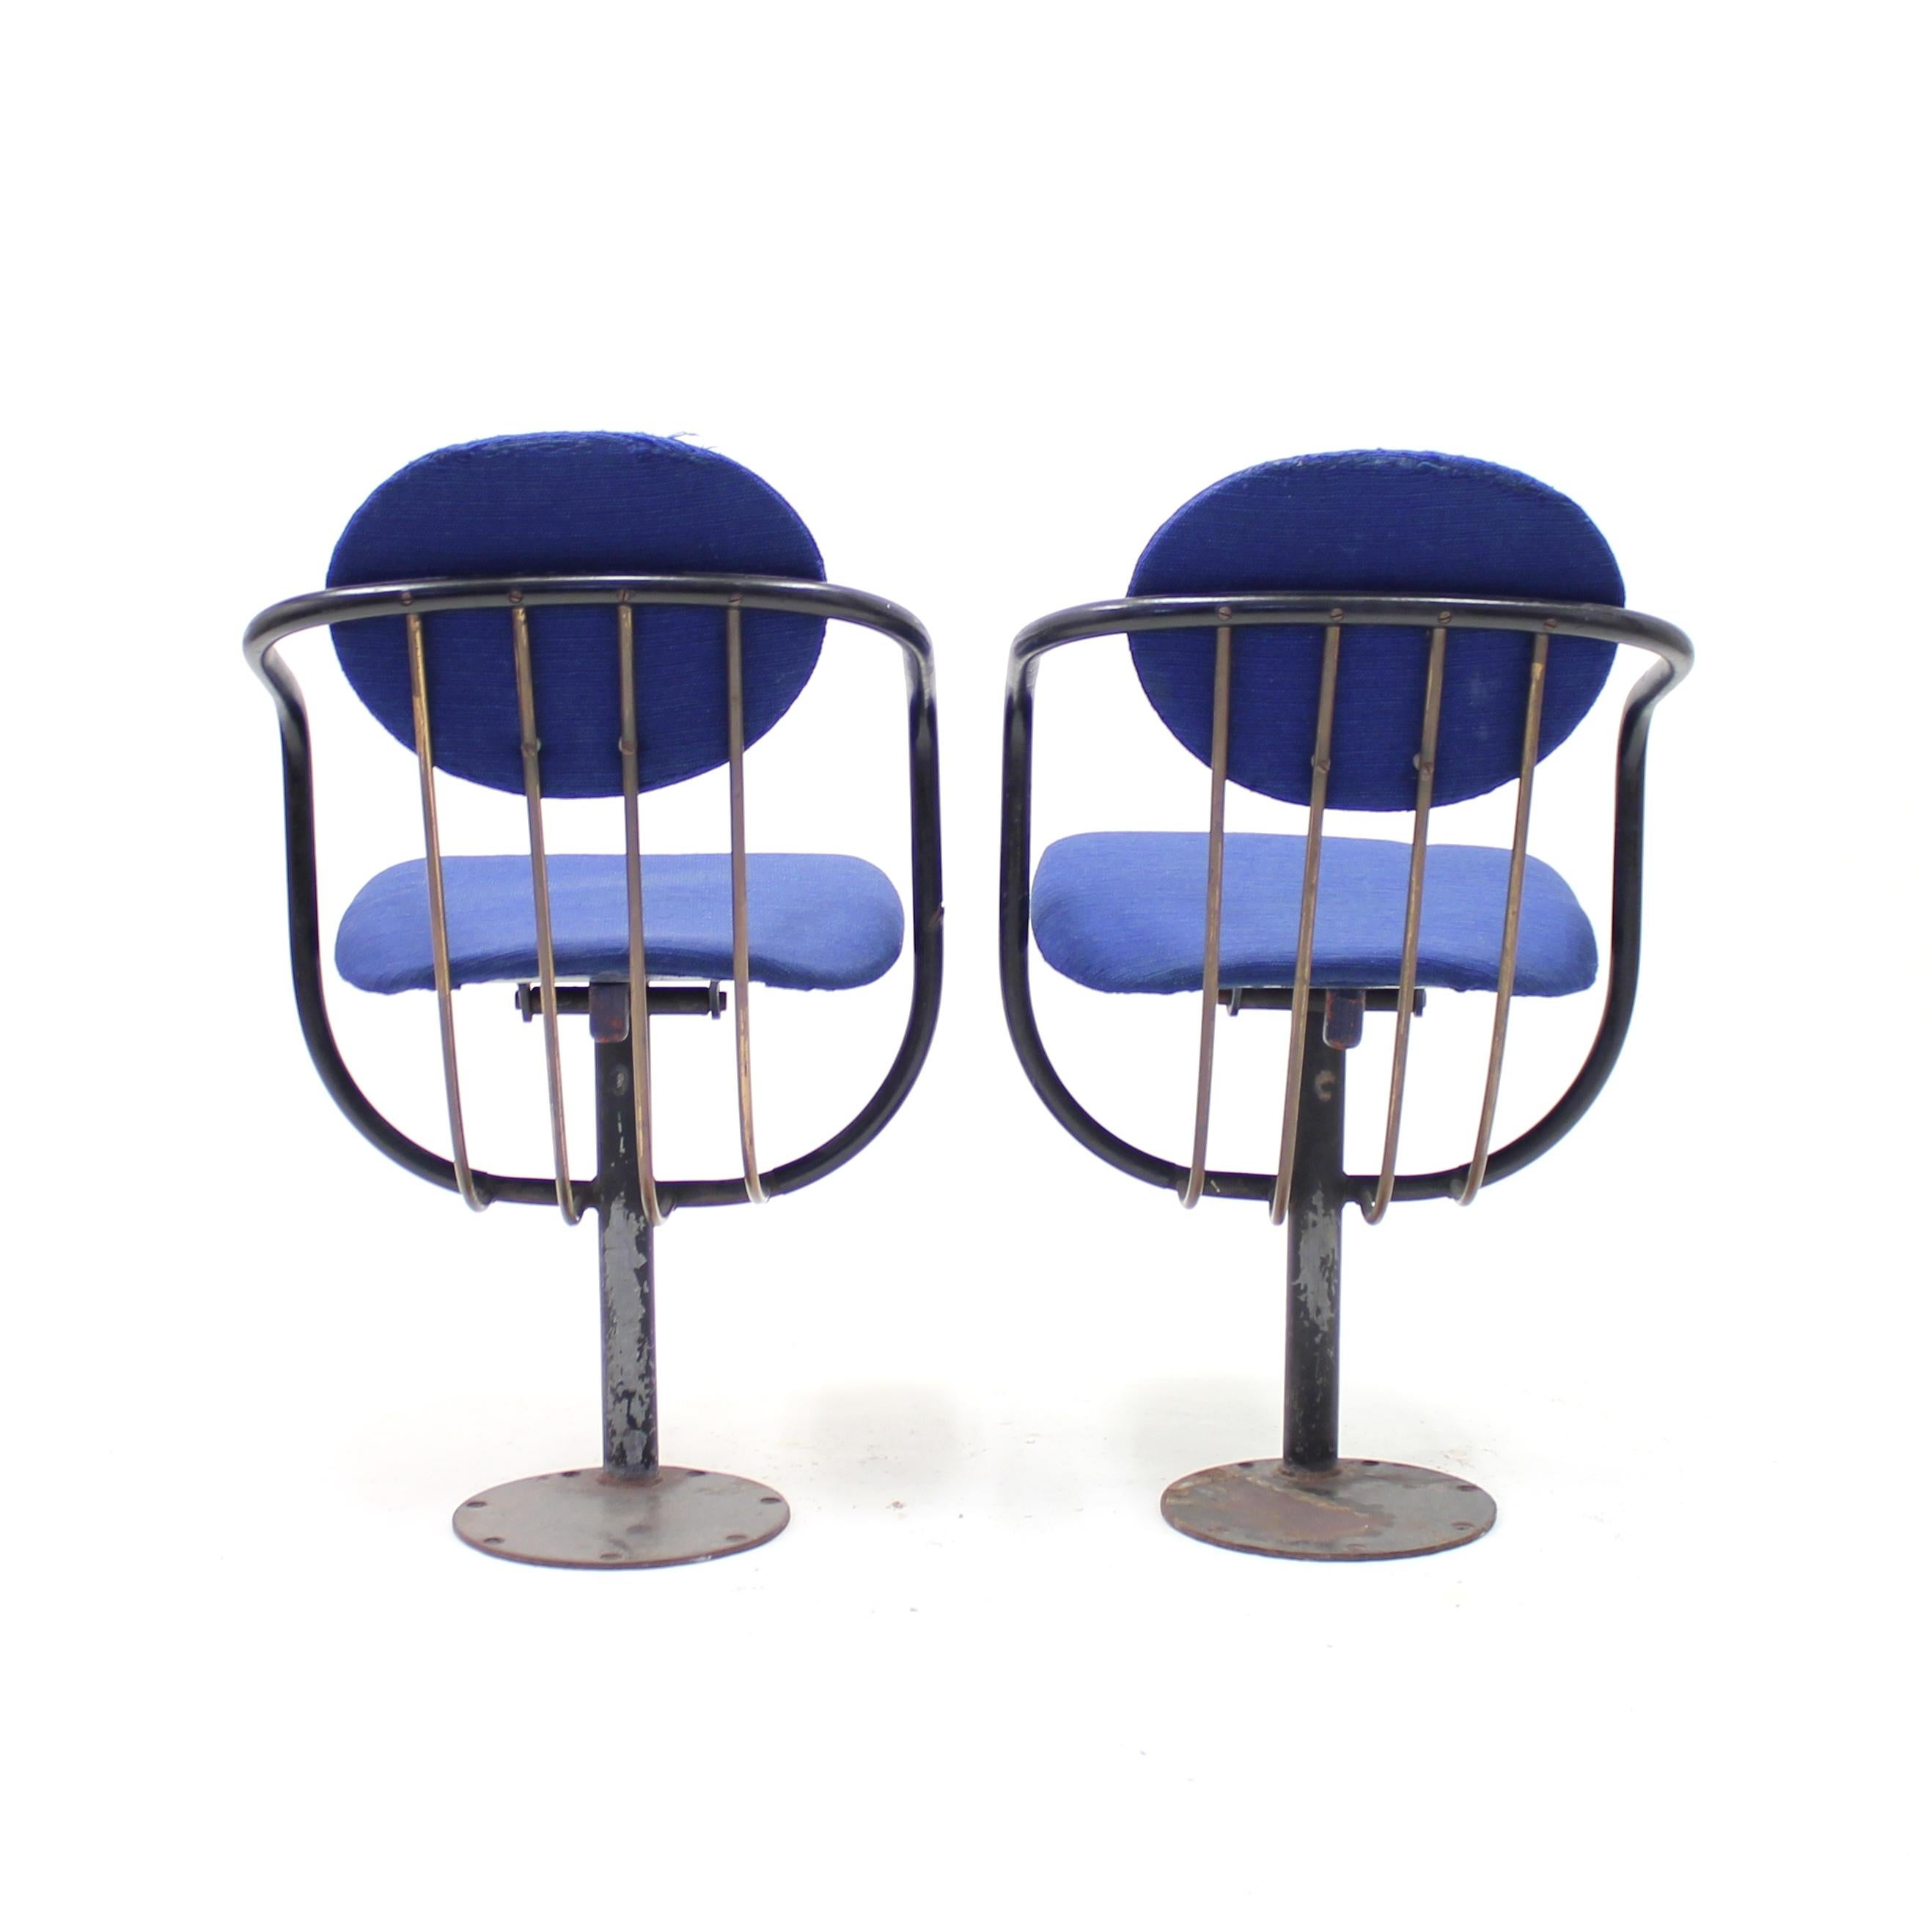 Mid-20th Century Poul Henningsen, Pair of Foldable Theatre Chairs for the Betty Nansen Theatre, 1 For Sale